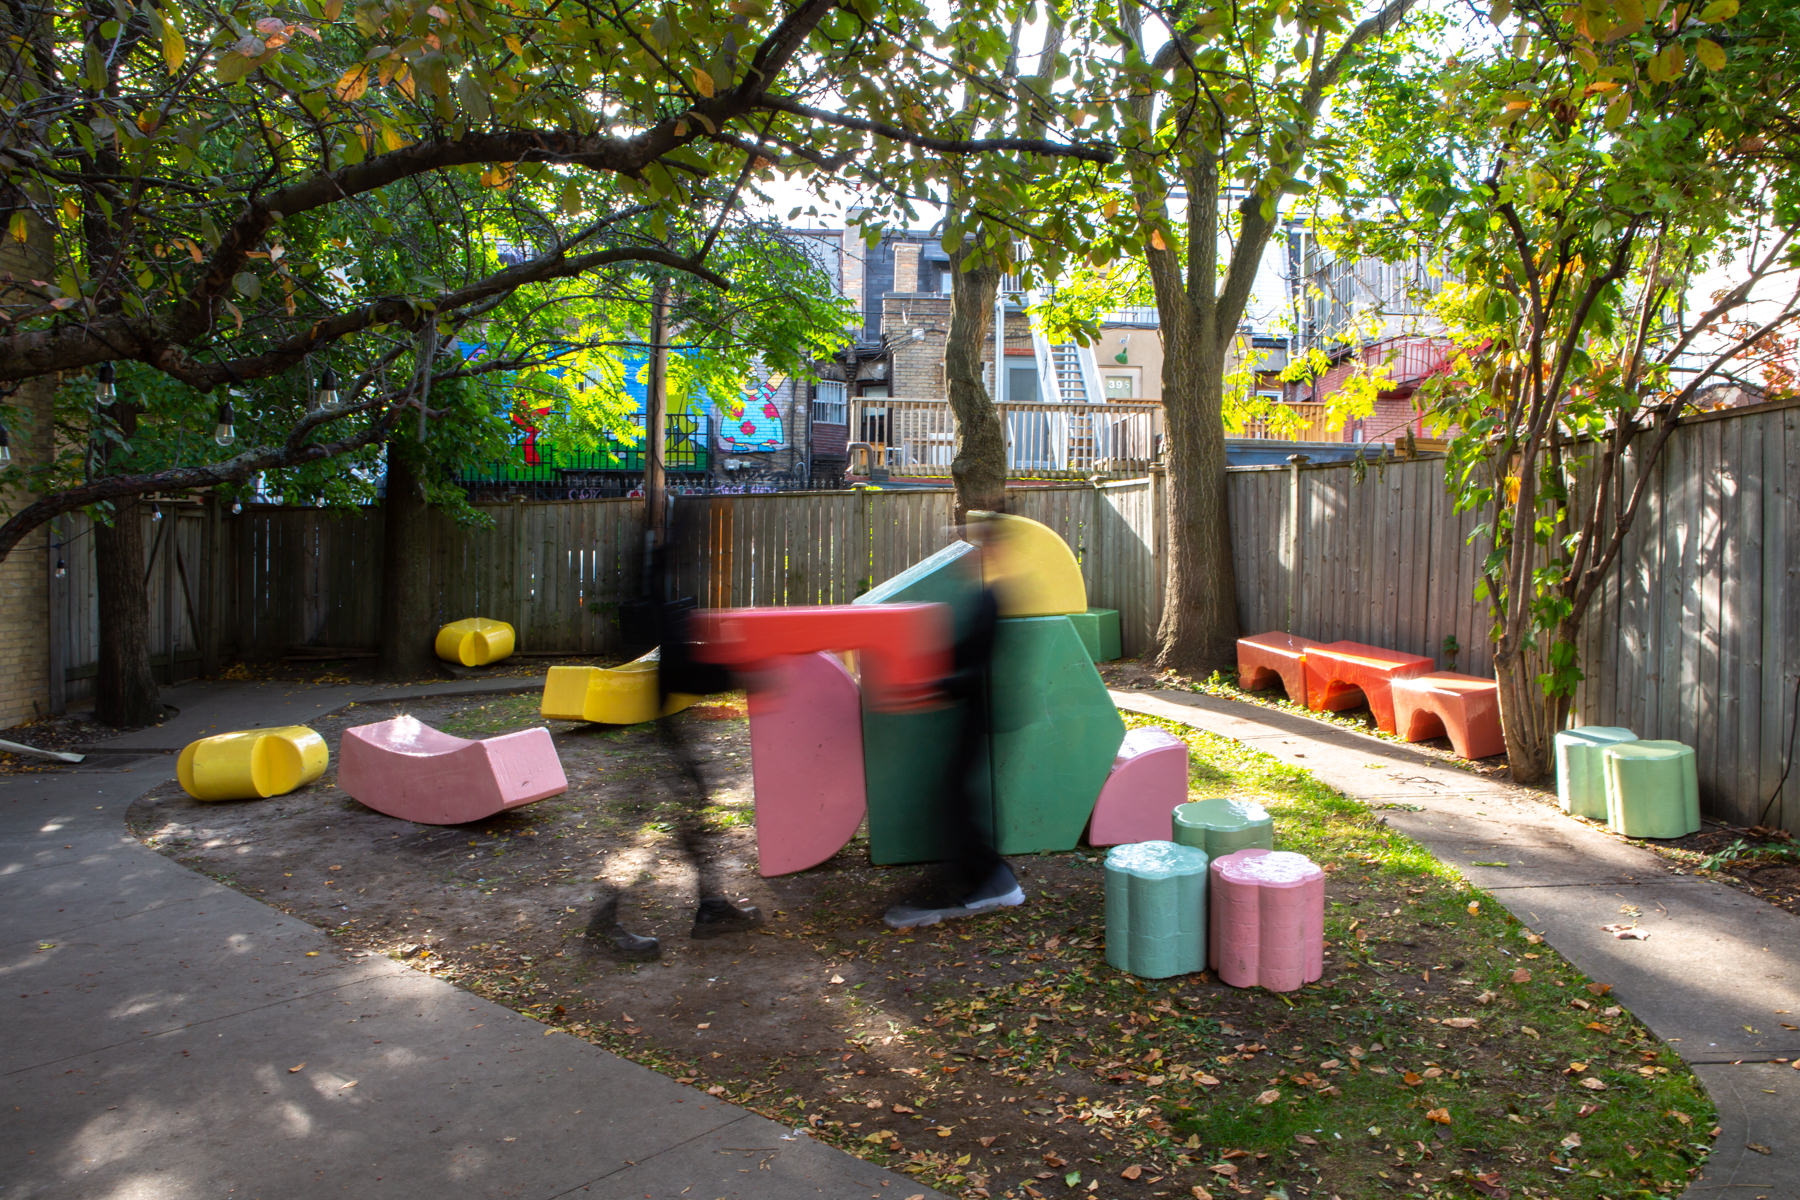 Wide-angle view of about 20 large-scale, colourful blocks from Cecil Community Planting Imagination project. 2 people are photographed moving quickly in front of the blocks.